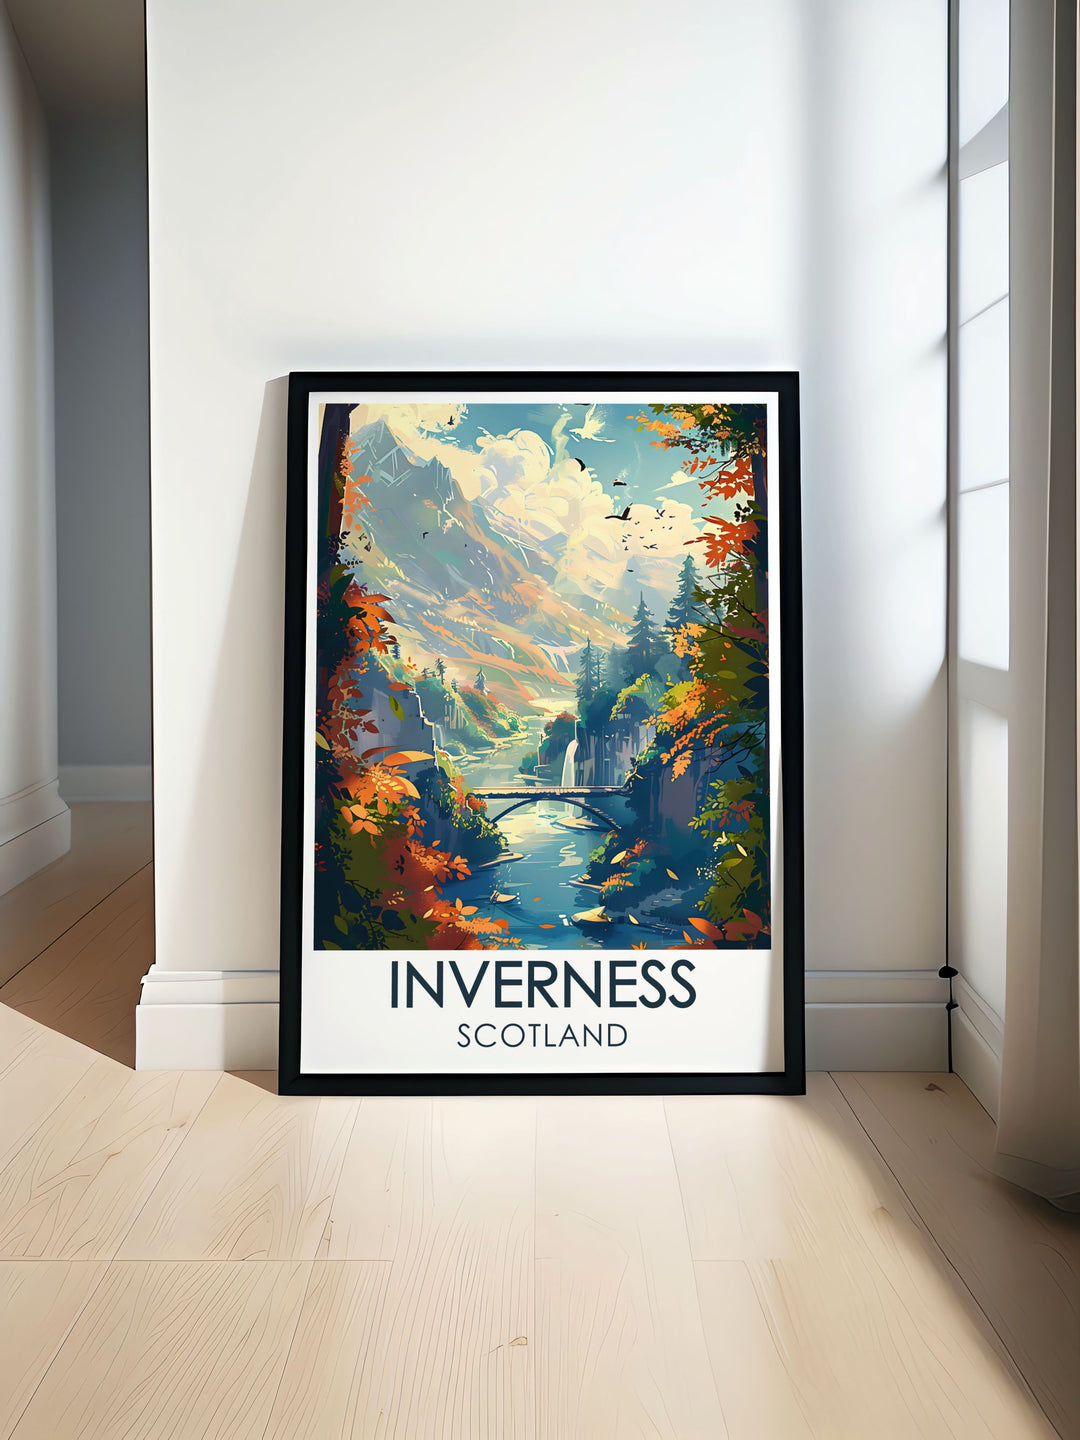 a framed poster of a river in scotland